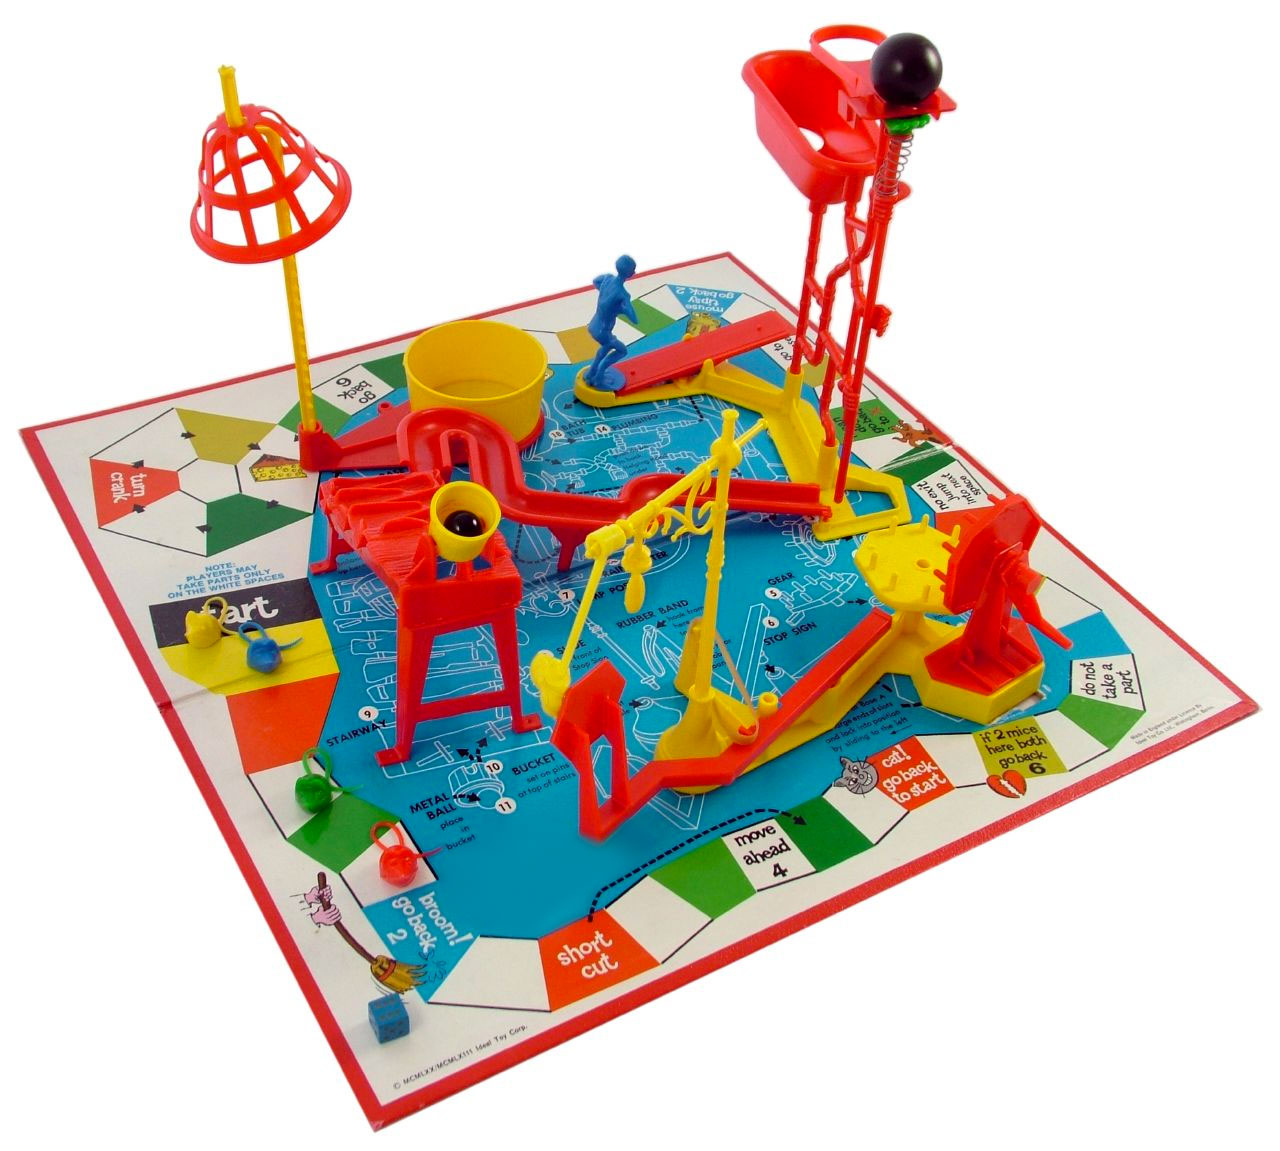 Retro Toys Quiz 🎠: Can You Identify These 1970s Toys? Mouse Trap